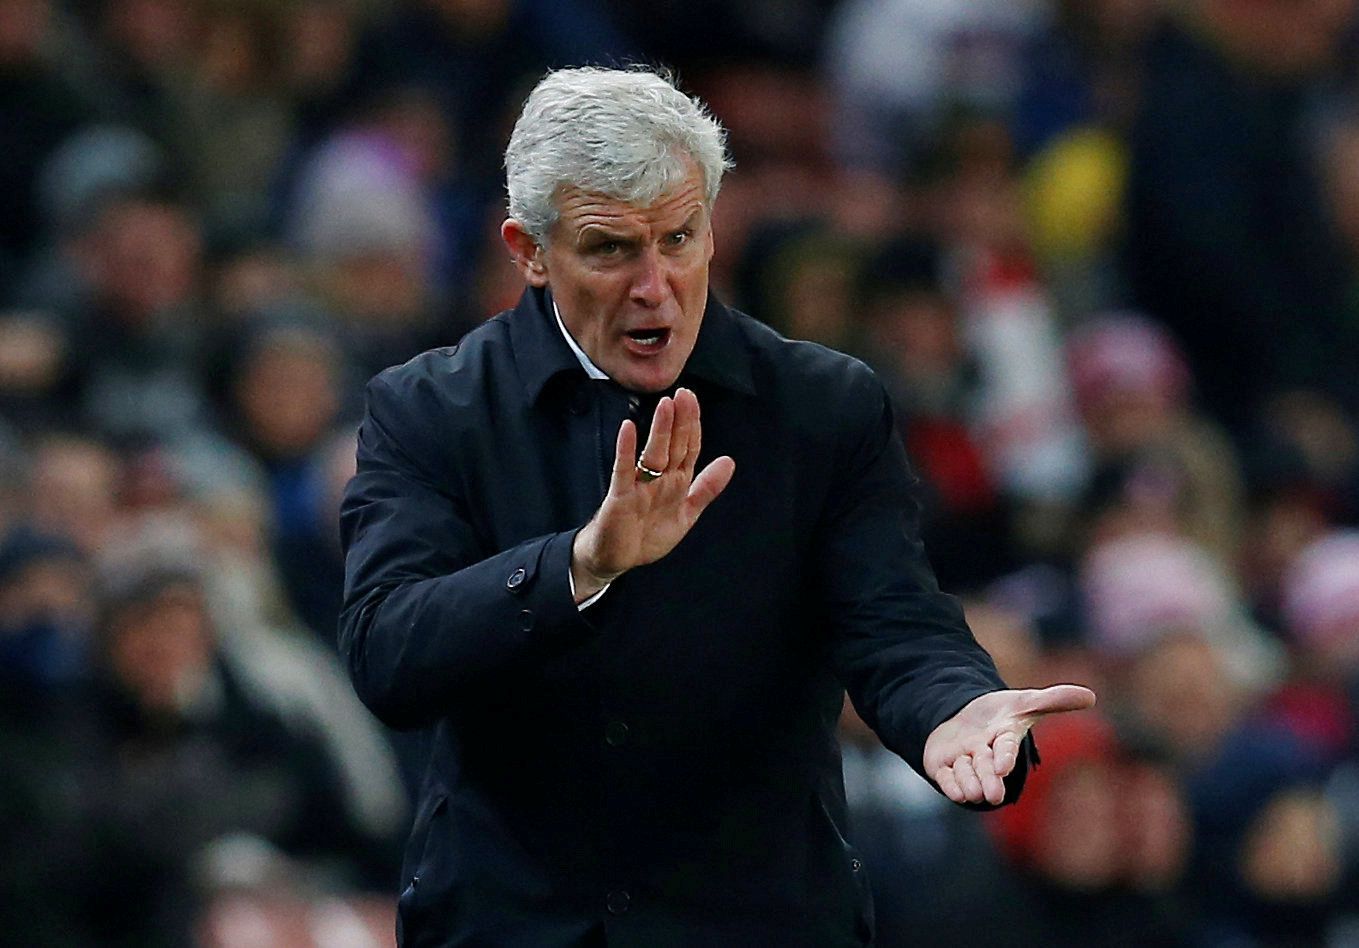 FILE PHOTO: Soccer Football - Premier League - Stoke City vs Swansea City - bet365 Stadium, Stoke-on-Trent, Britain - December 2, 2017   Stoke City manager Mark Hughes reacts   REUTERS/Andrew Yates    EDITORIAL USE ONLY. No use with unauthorized audio, video, data, fixture lists, club/league logos or 